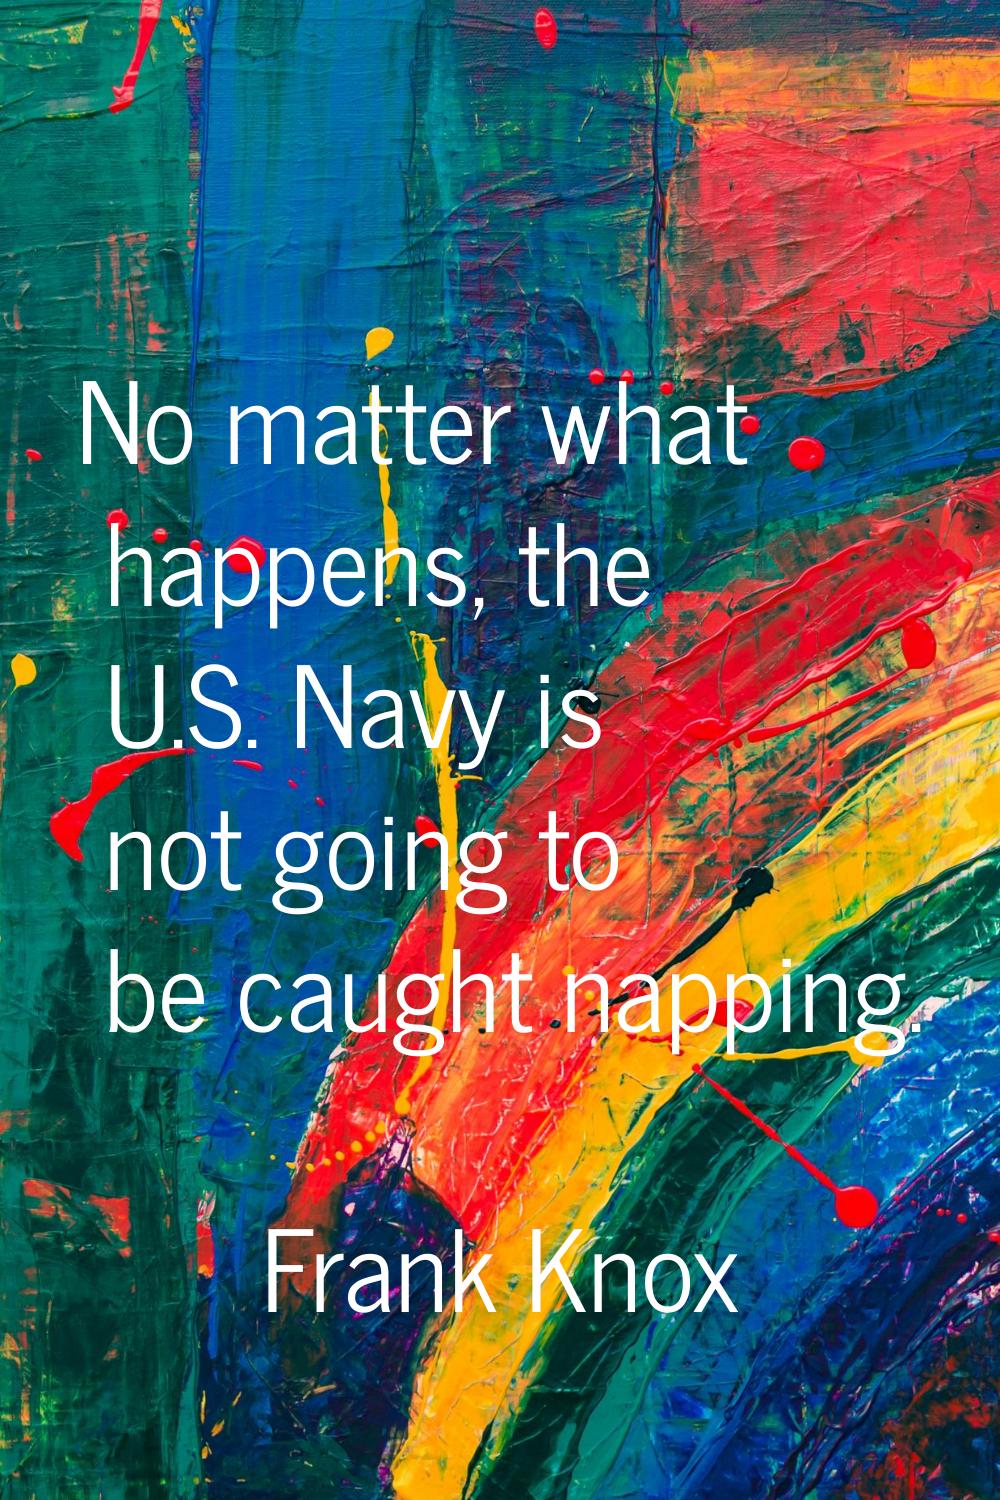 No matter what happens, the U.S. Navy is not going to be caught napping.